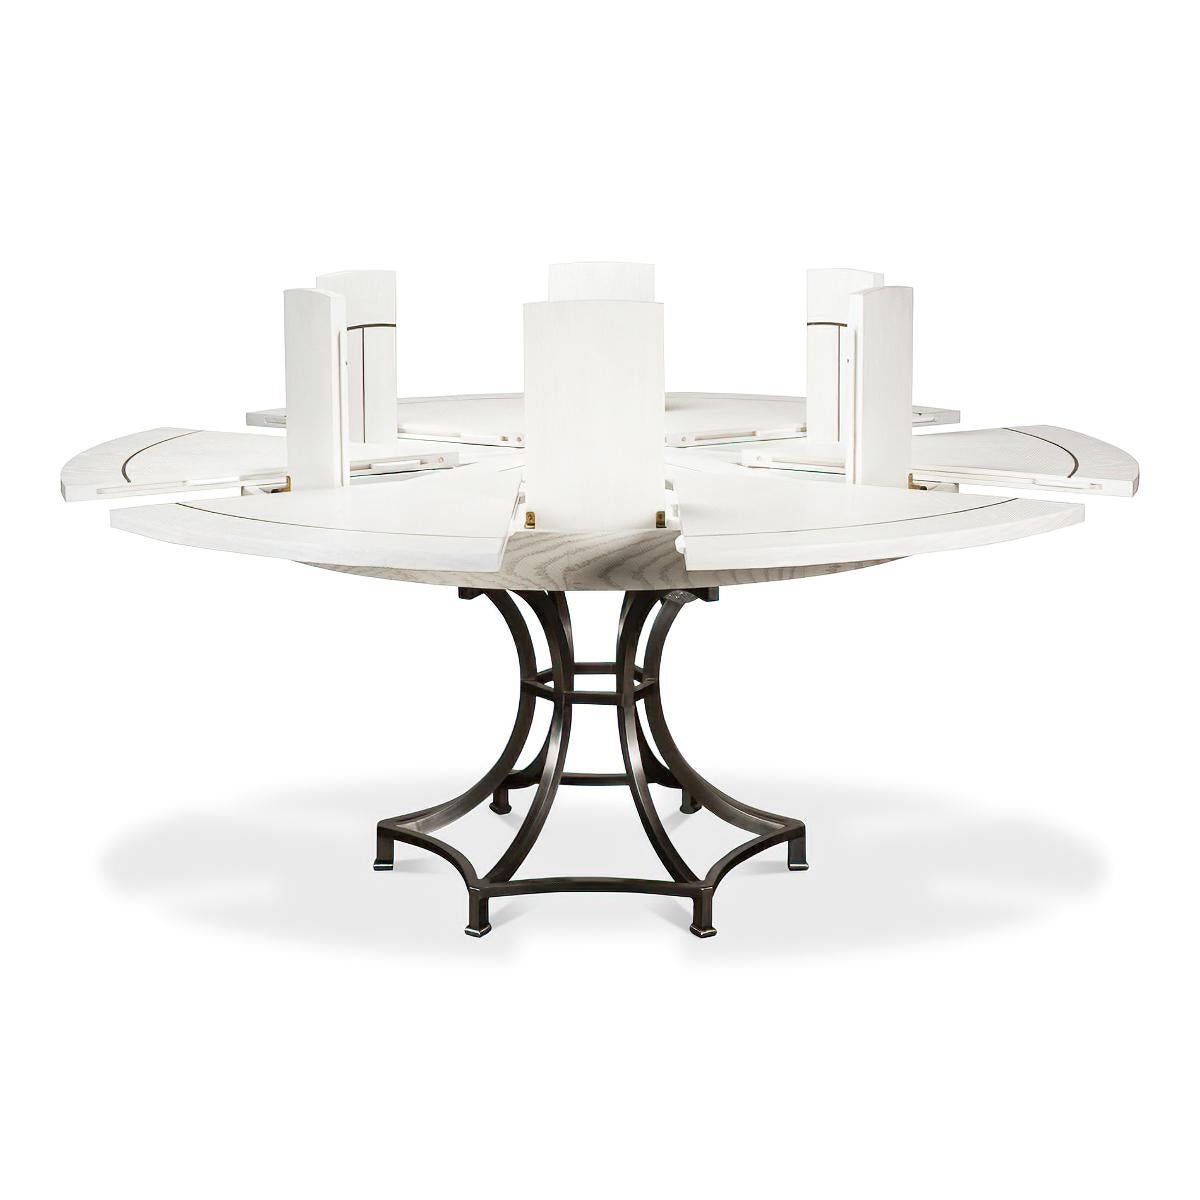 Modern Industrial Round Dining Table, White Oak In New Condition For Sale In Westwood, NJ